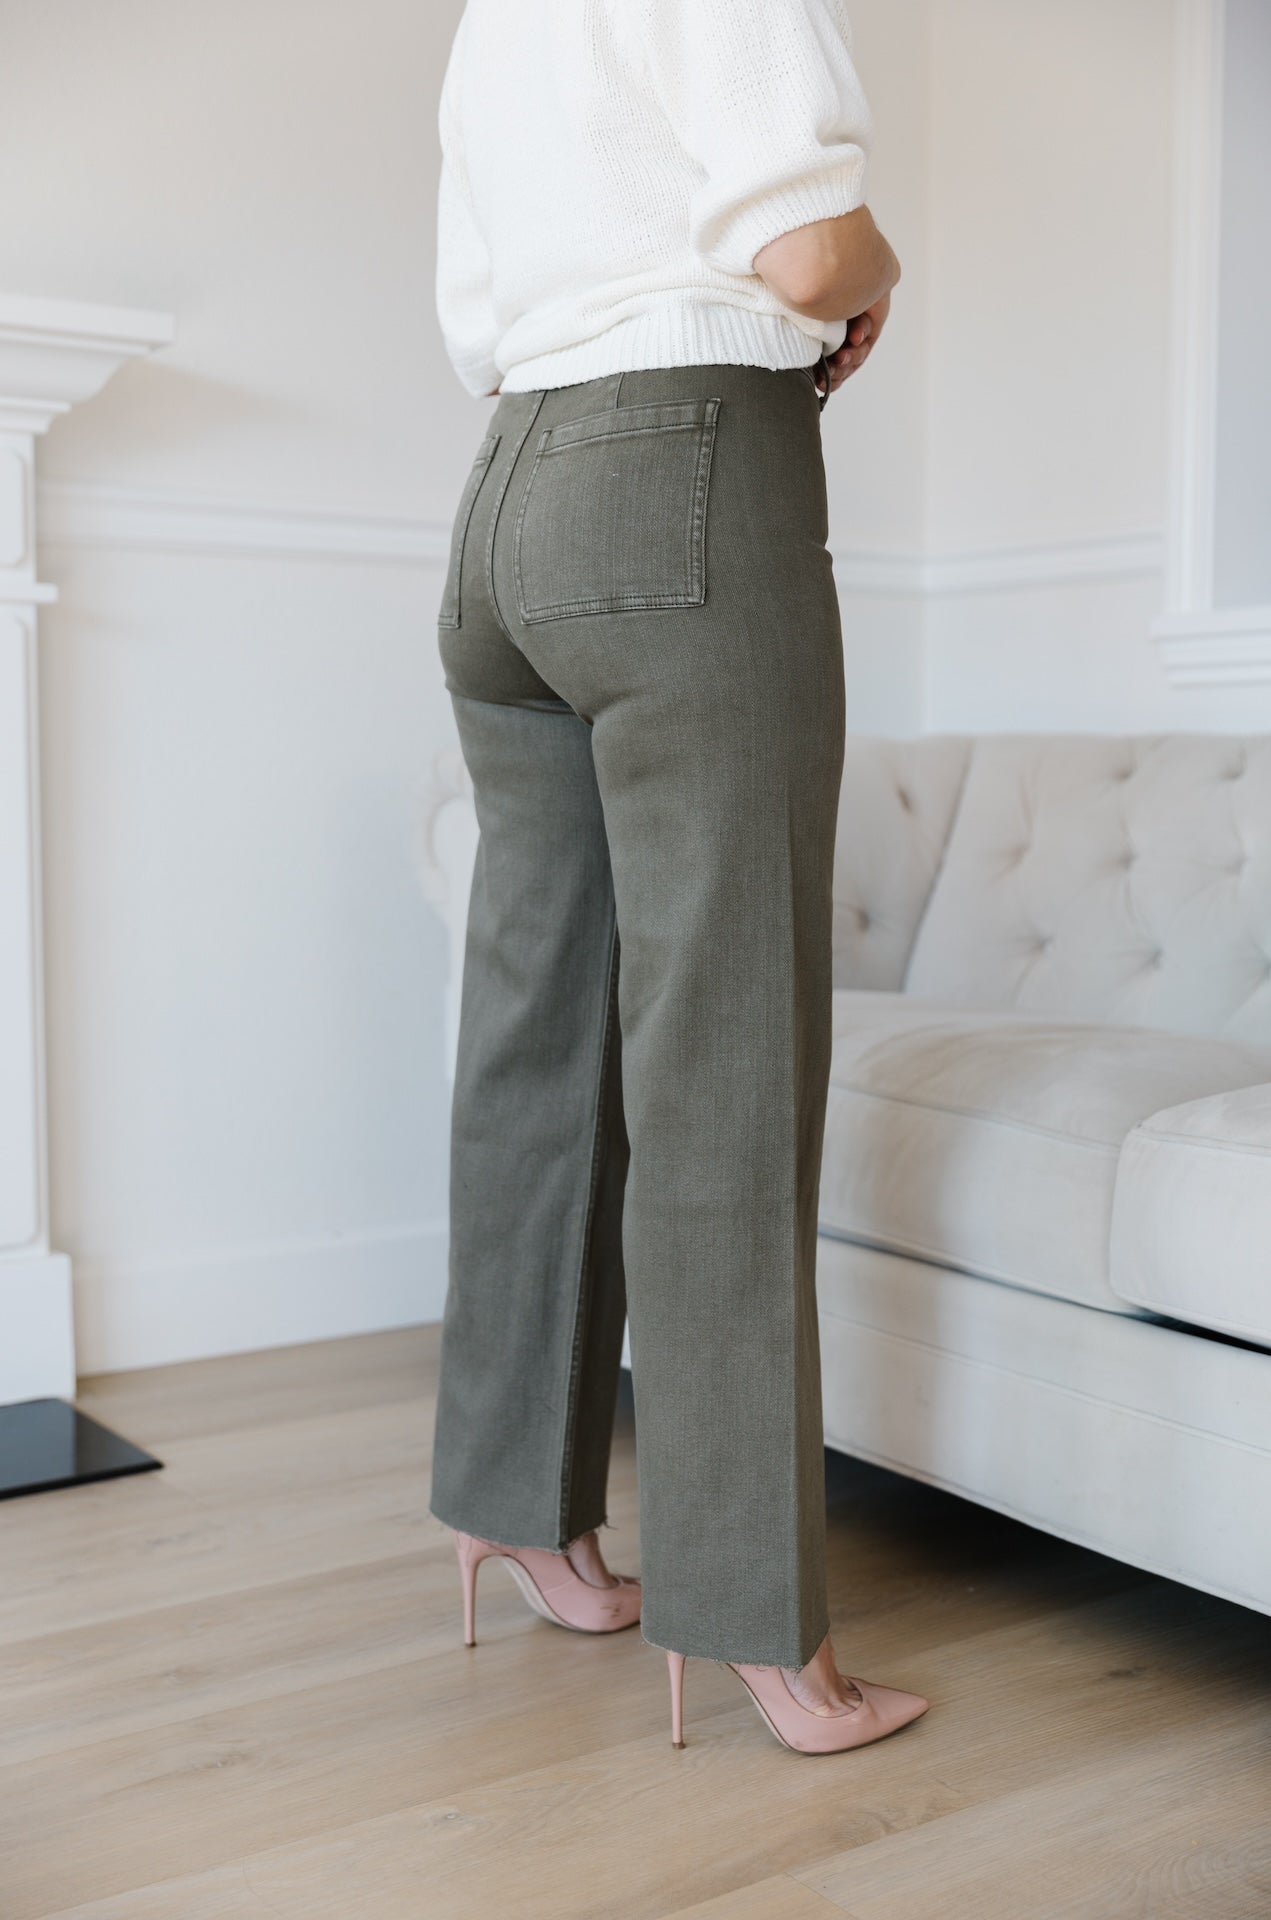 Olive Green Wide Leg Jeans